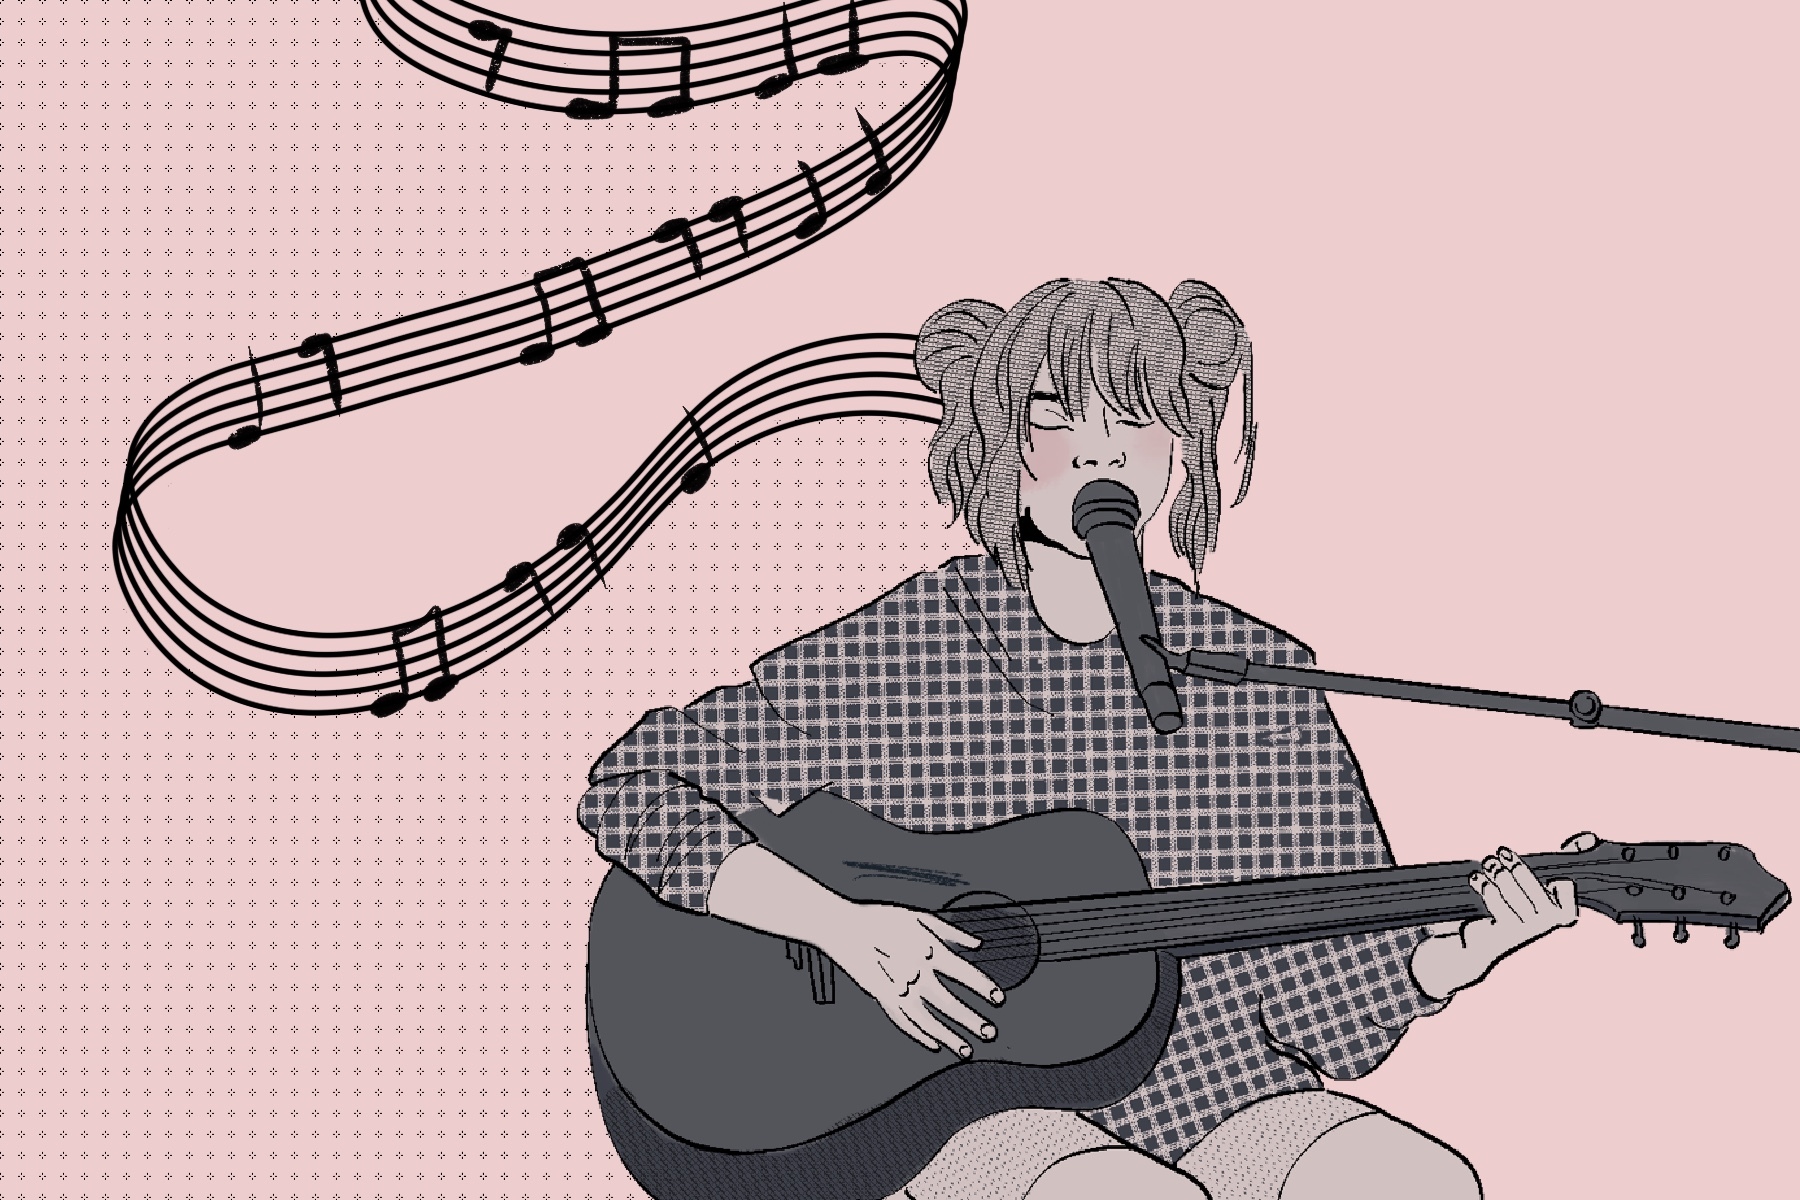 A drawing of Eilish's guitar songs shows the singer with a guitar and music notes in the backround.